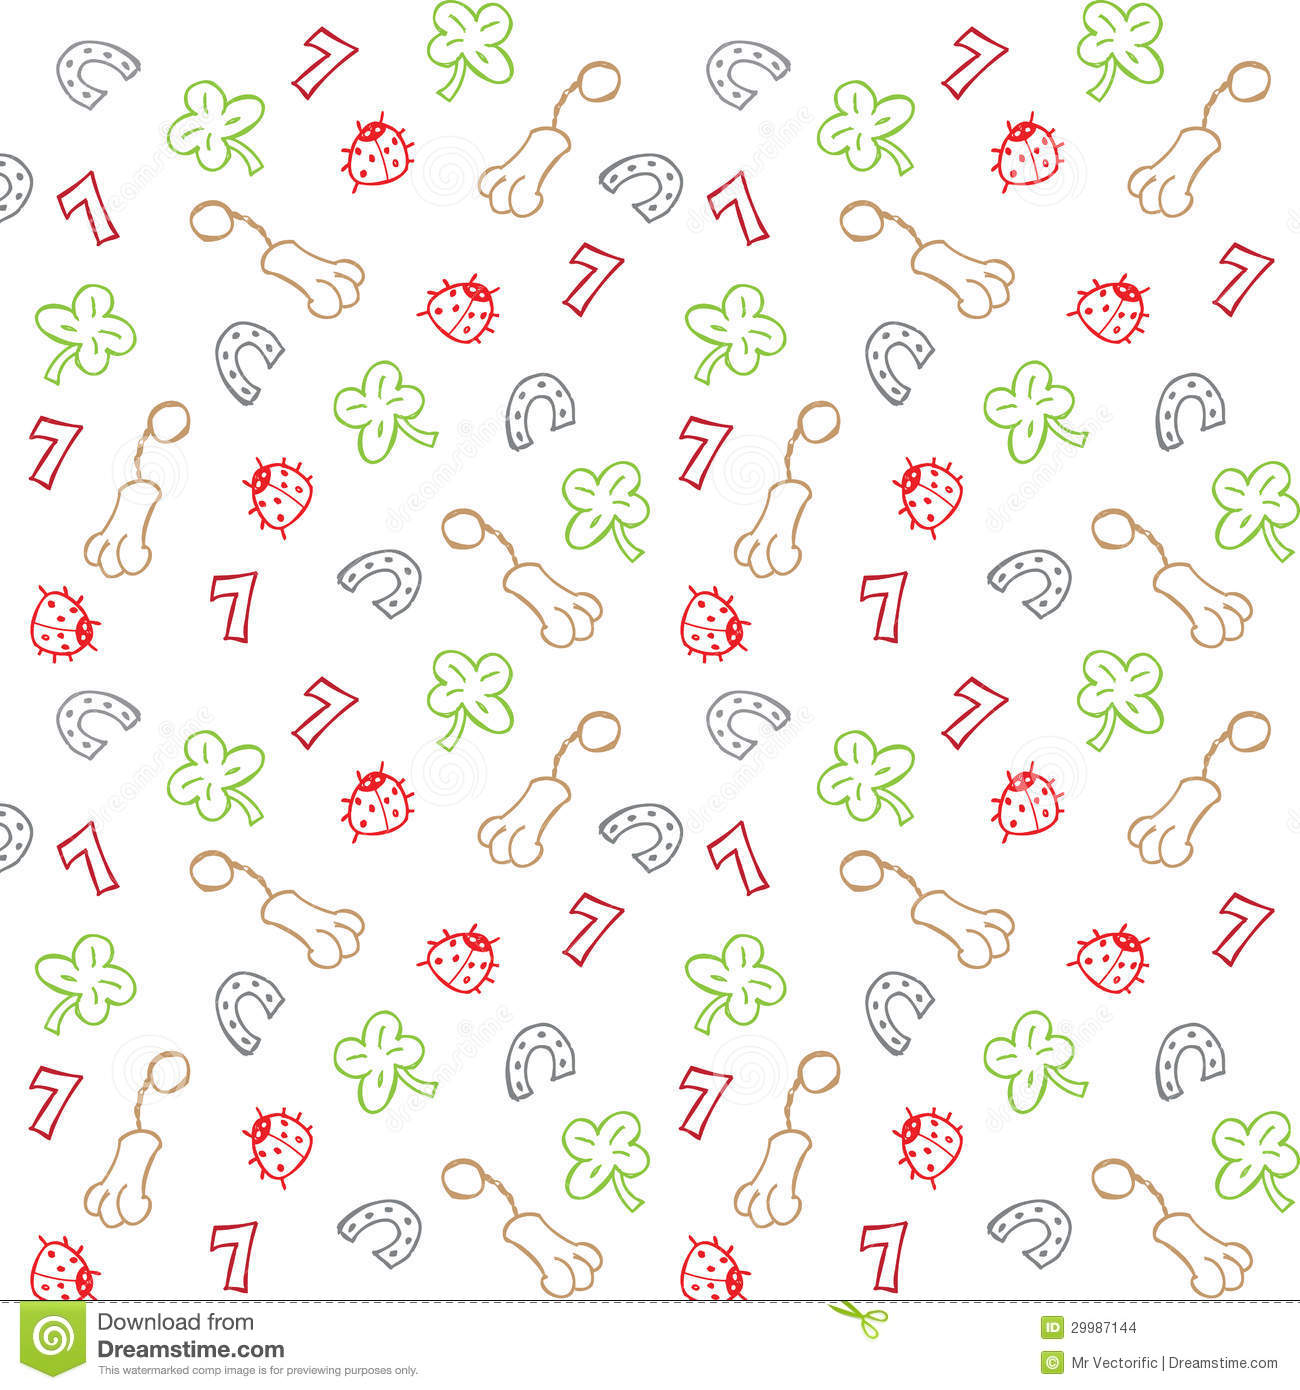 Lucky Charms Illustration Seamless Pattern Stock Images   Image